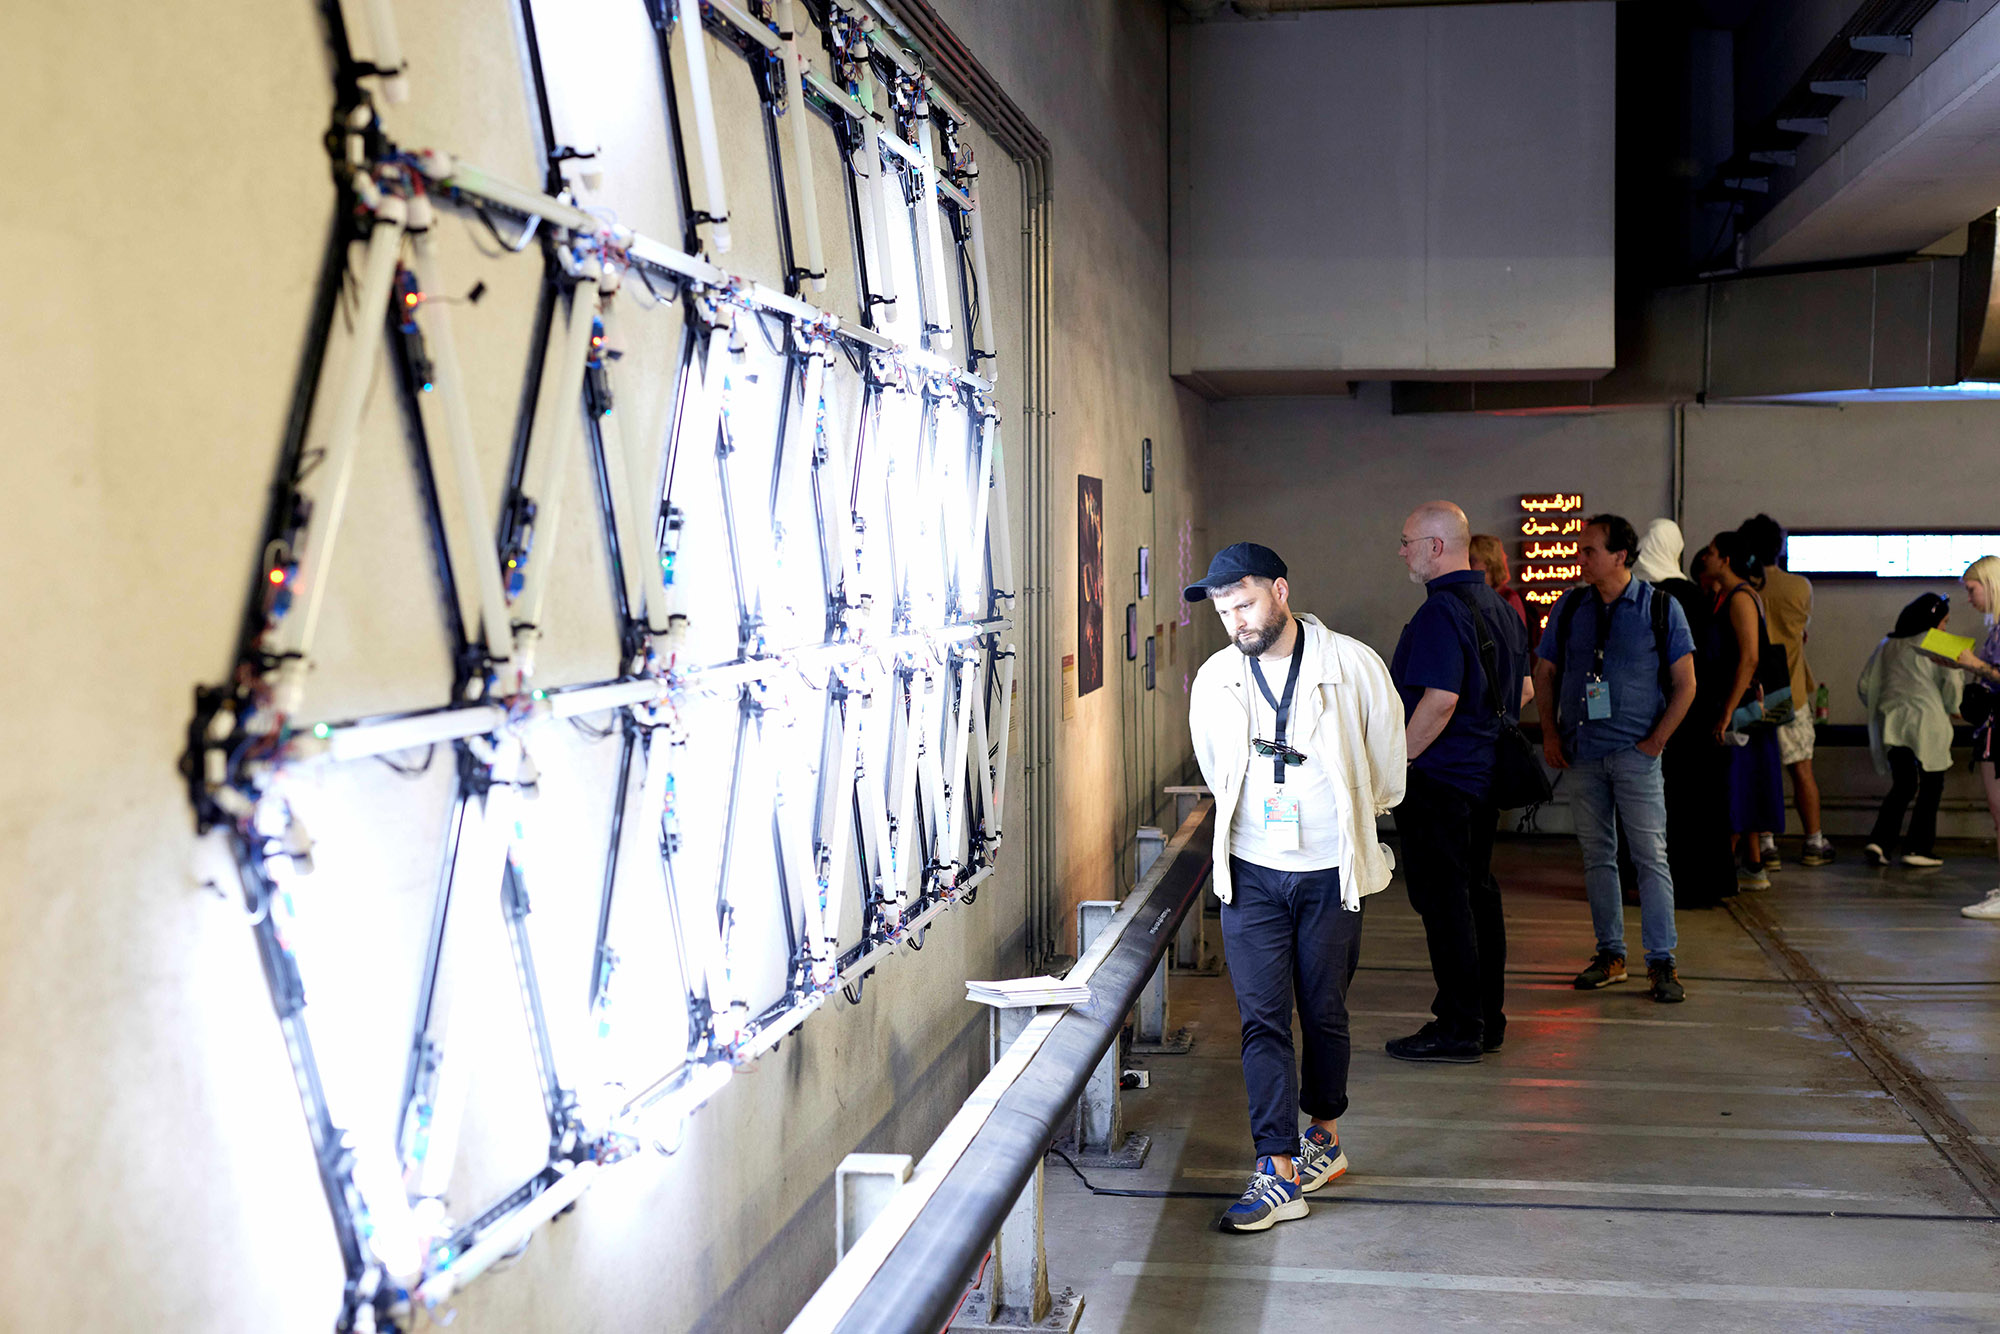 Visitors viewing the X lab light installation at ars electronica